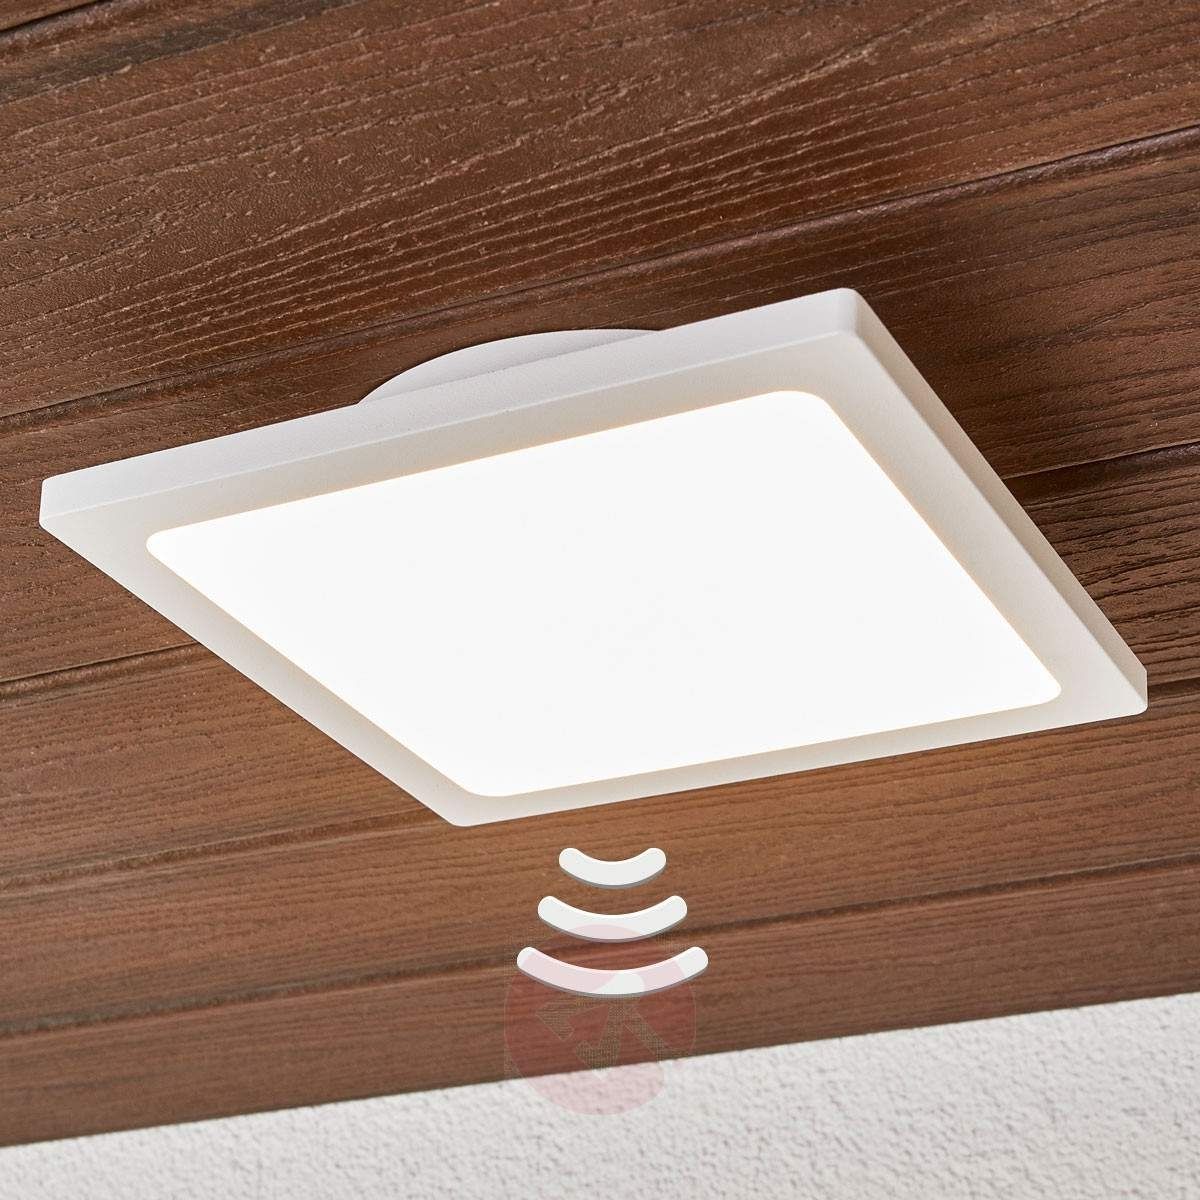 Latest Outdoor Ceiling Pir Lights Throughout White Led Outdoor Ceiling Light Mabella, Sensor (View 18 of 20)